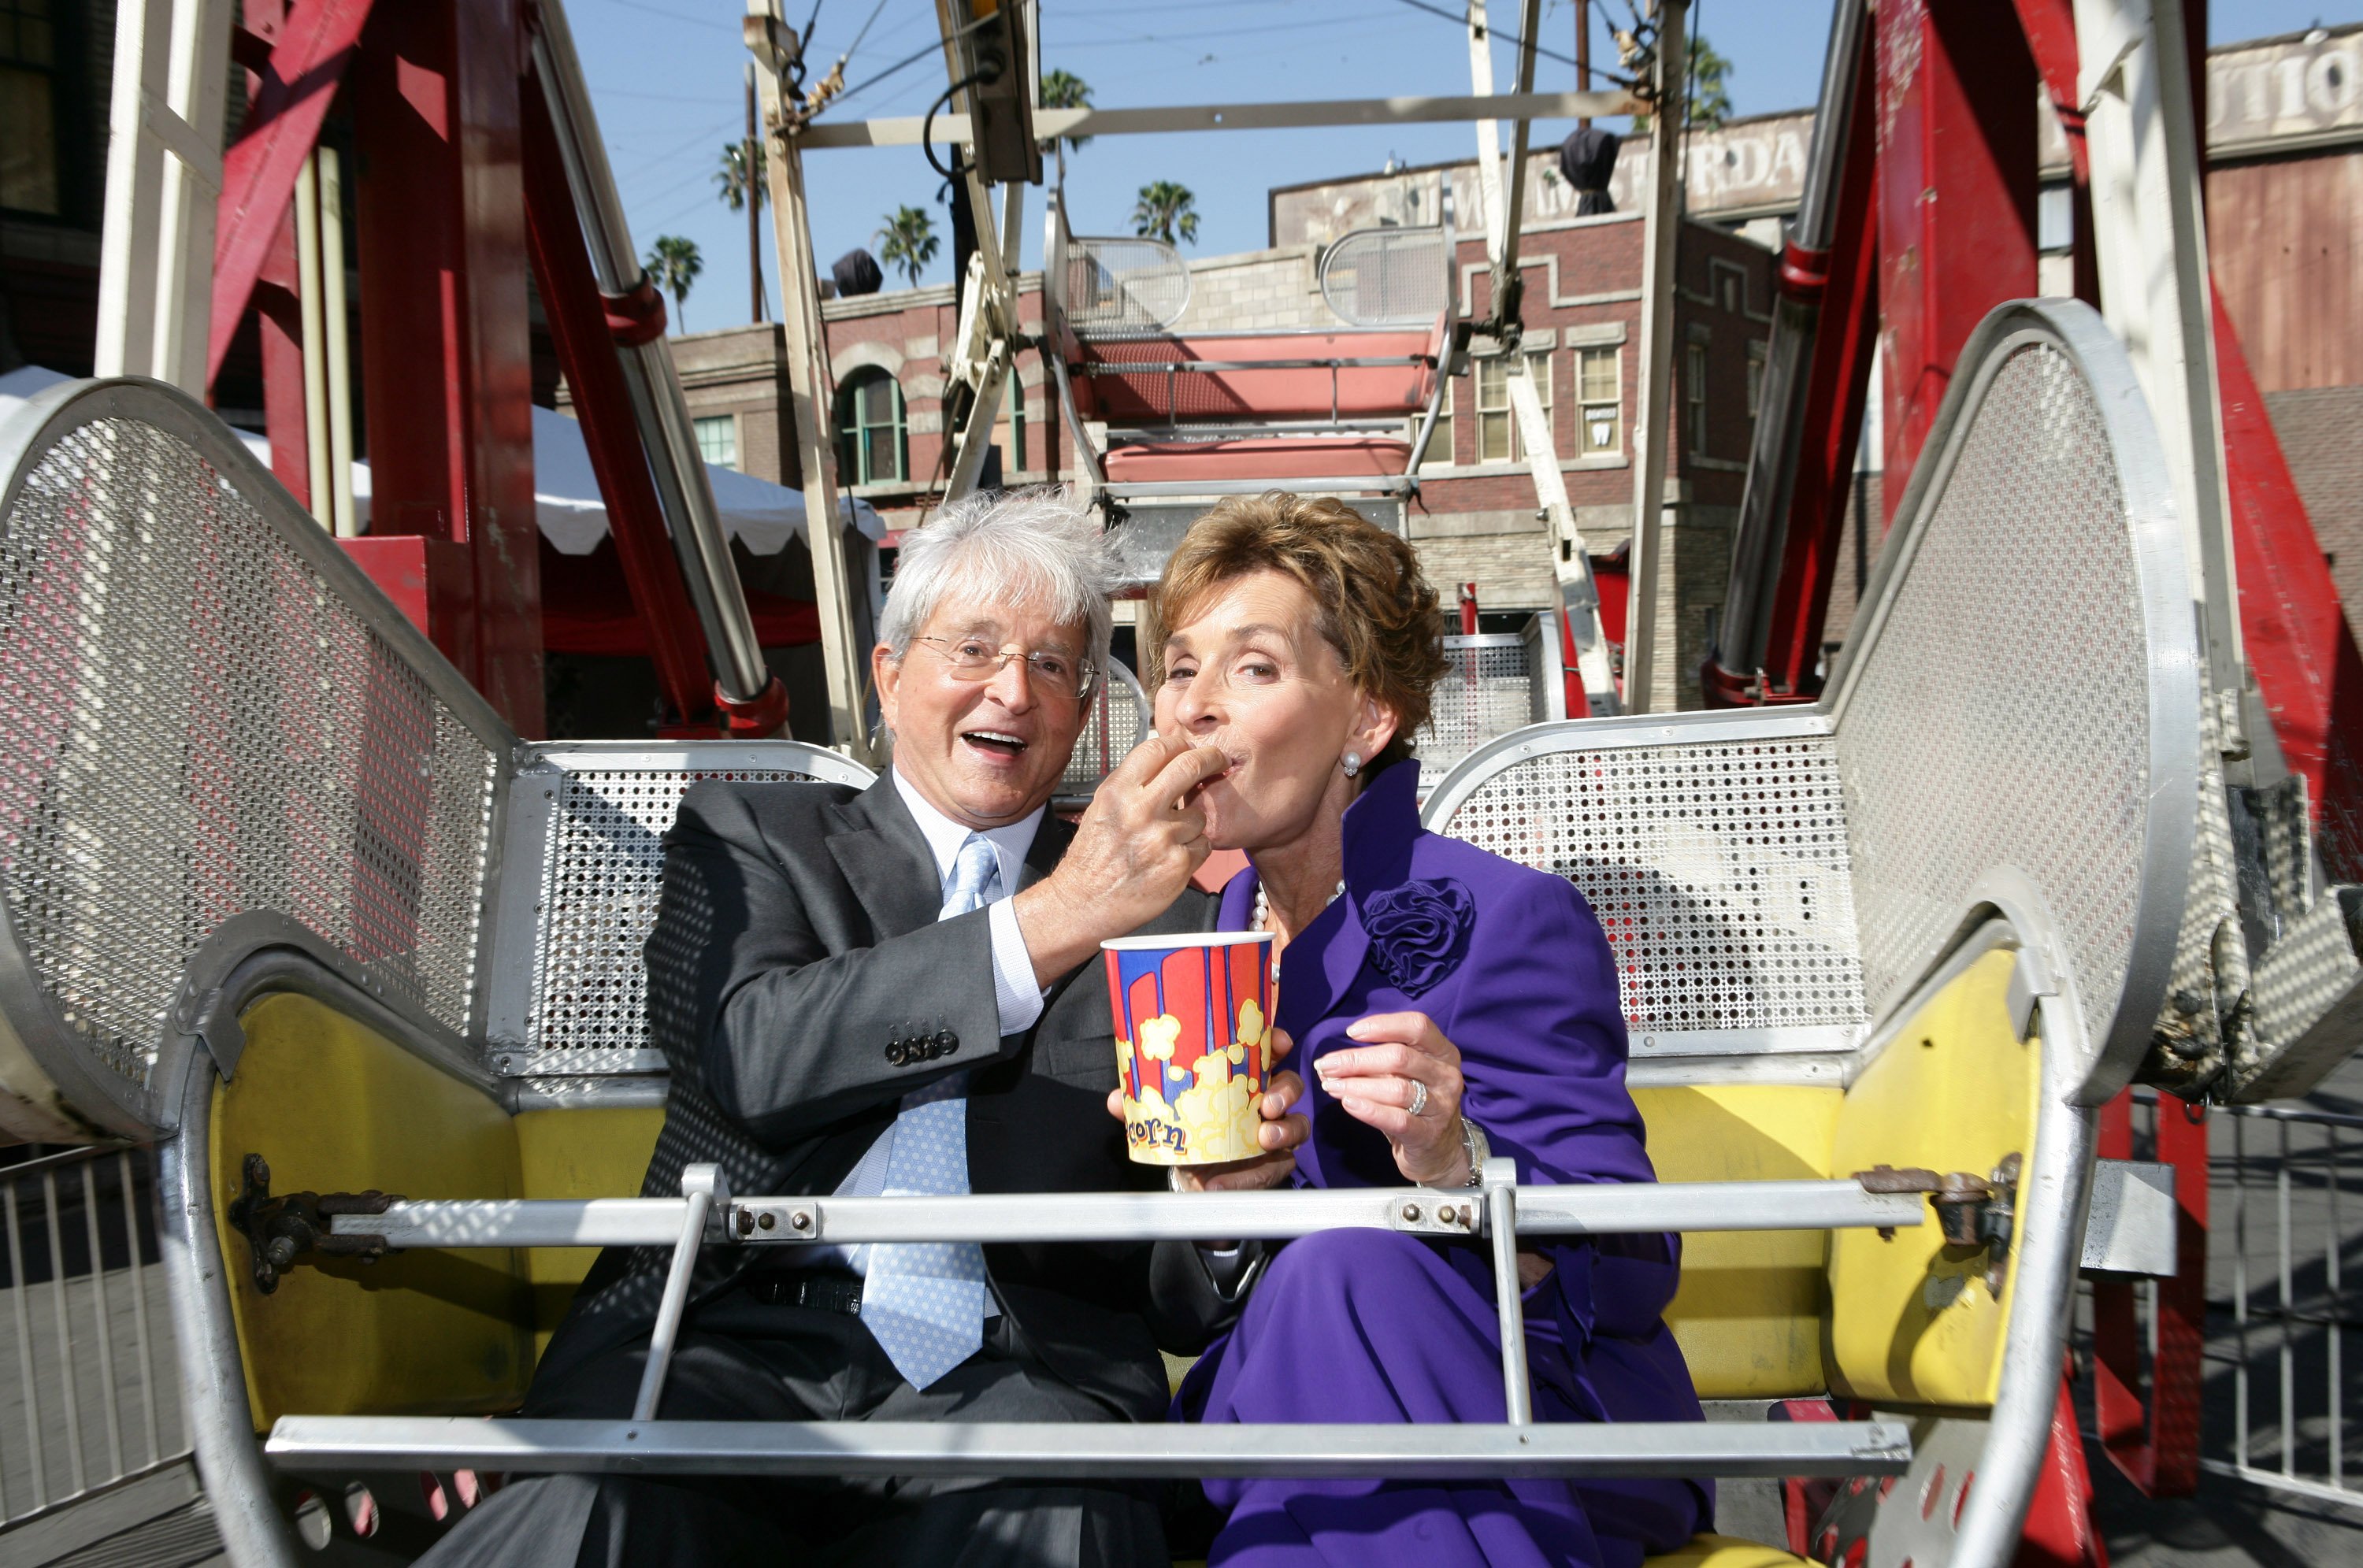 Judge Judy Sheindlin and Judge Jerry Sheindlin at her induction to the Hollywood Walk of Fame, 2006 | Source: Getty Images